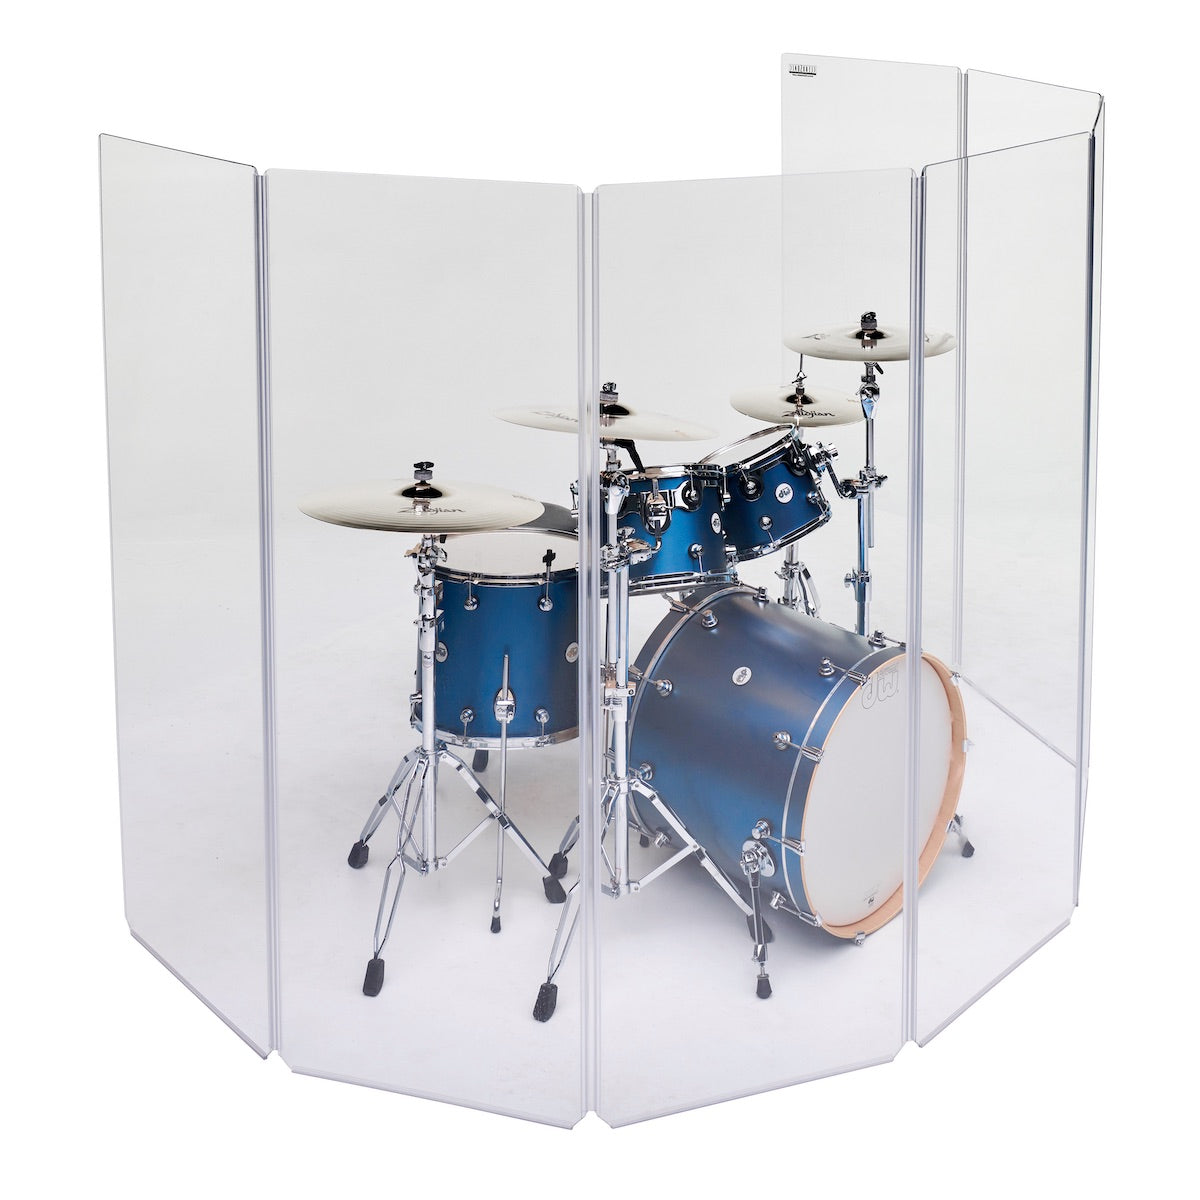 ClearSonic A2466x7 Drum Shield - 7 panel Sound Isolation System, angle